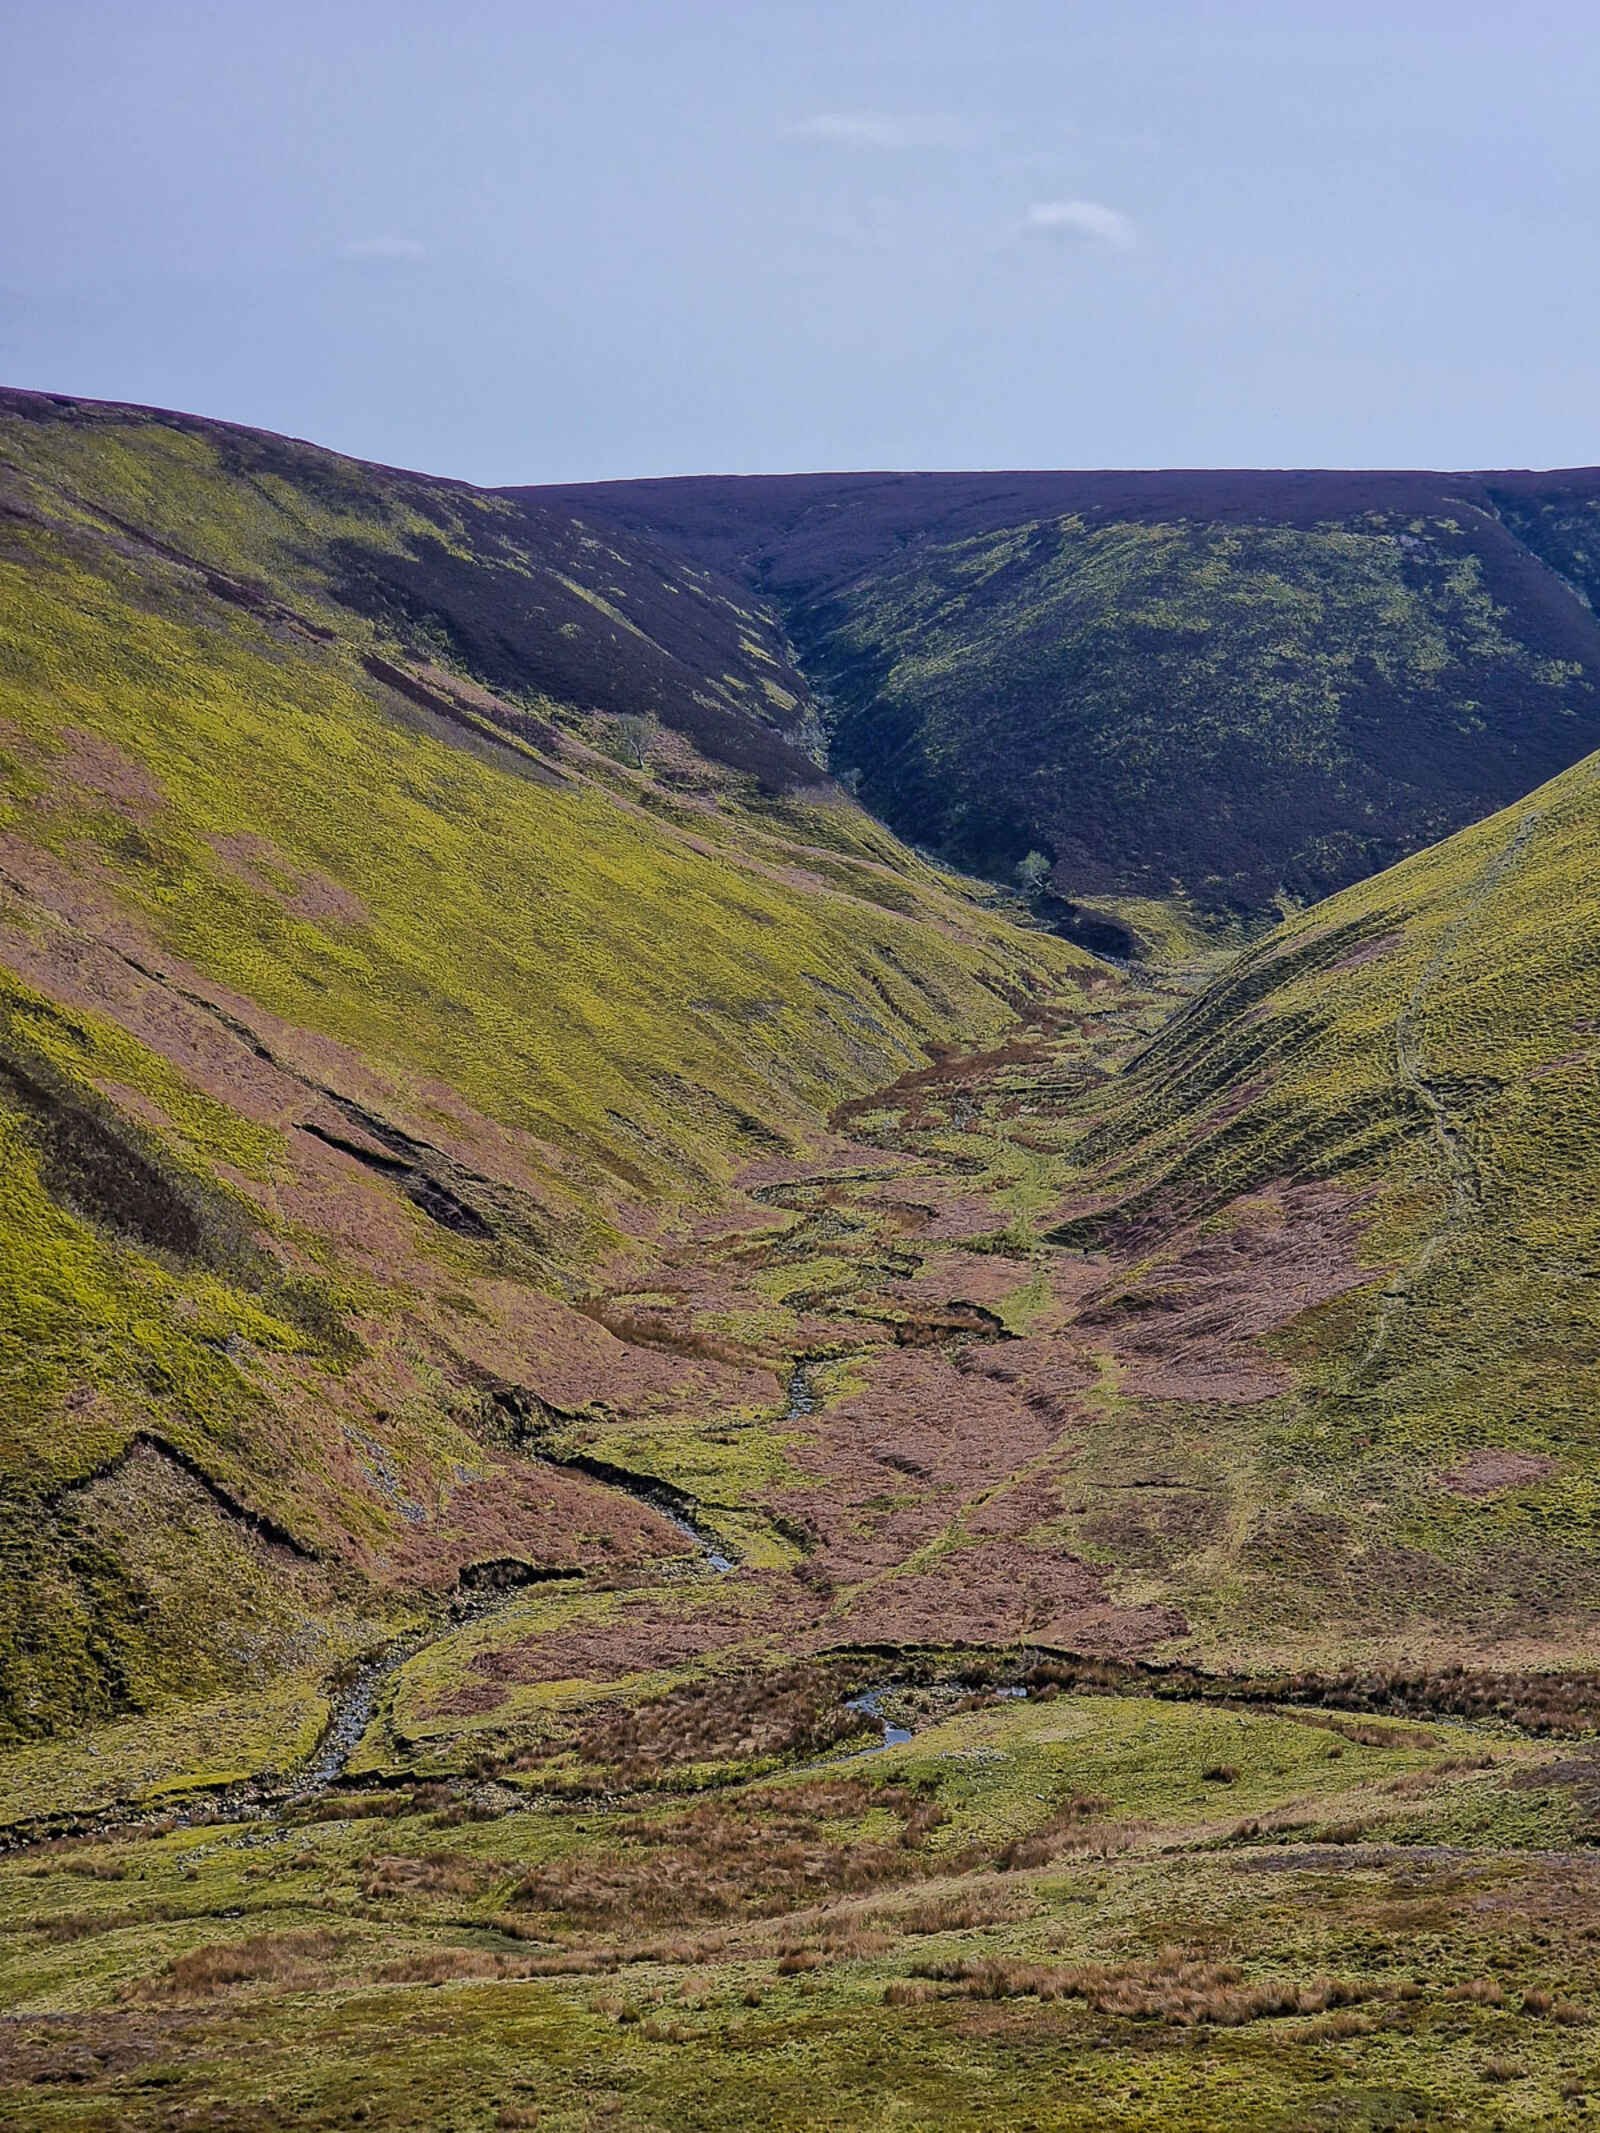 looking down into a green valley with a river snaking through it - the trough of bowland